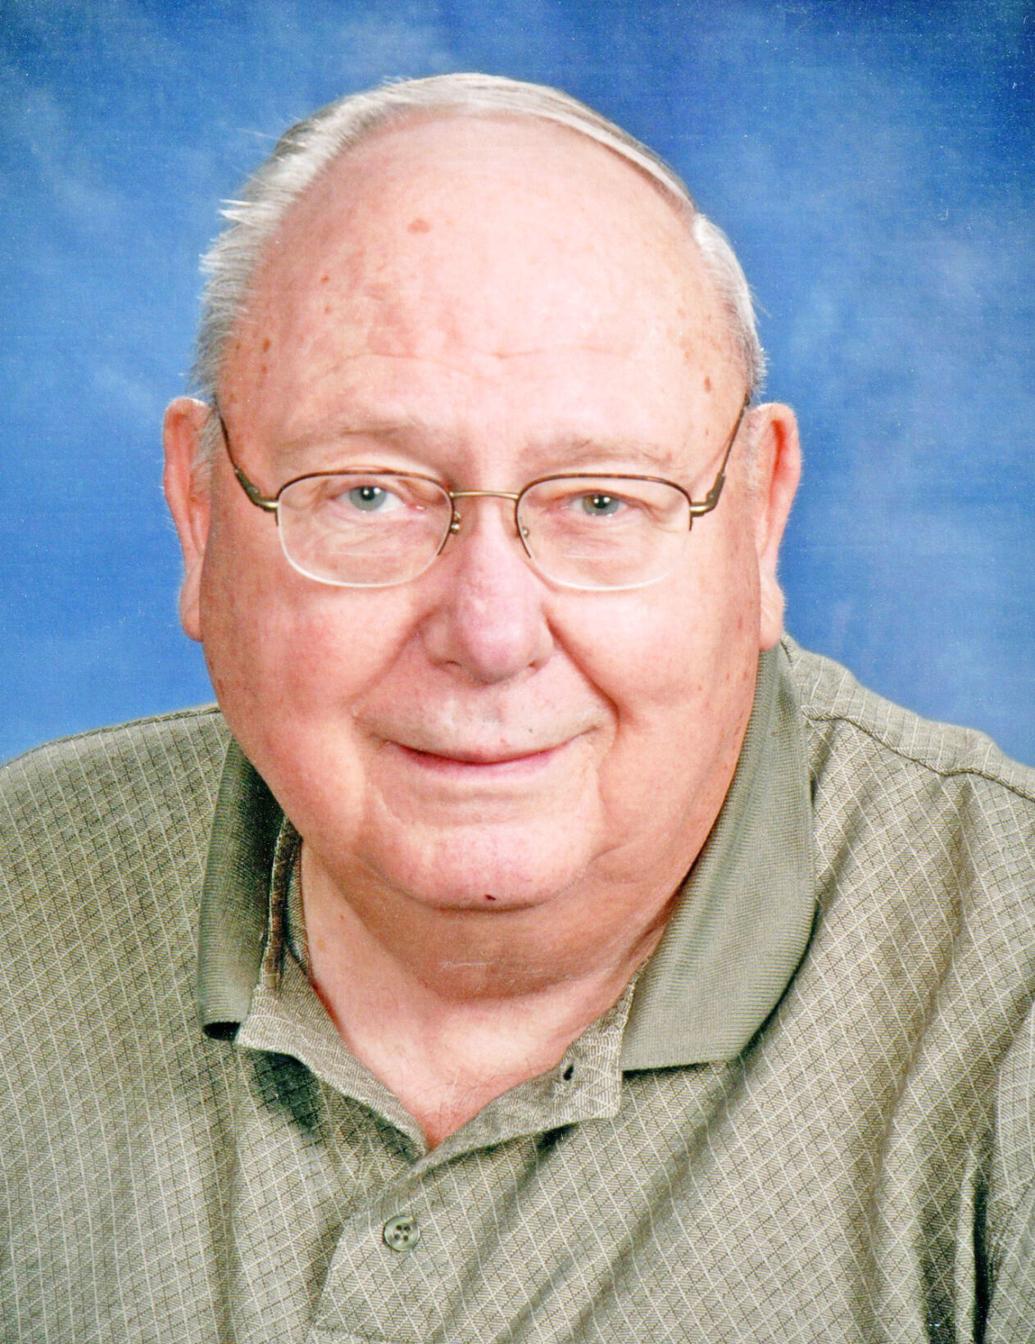 Obituary for Norman W. Nelson Obituaries